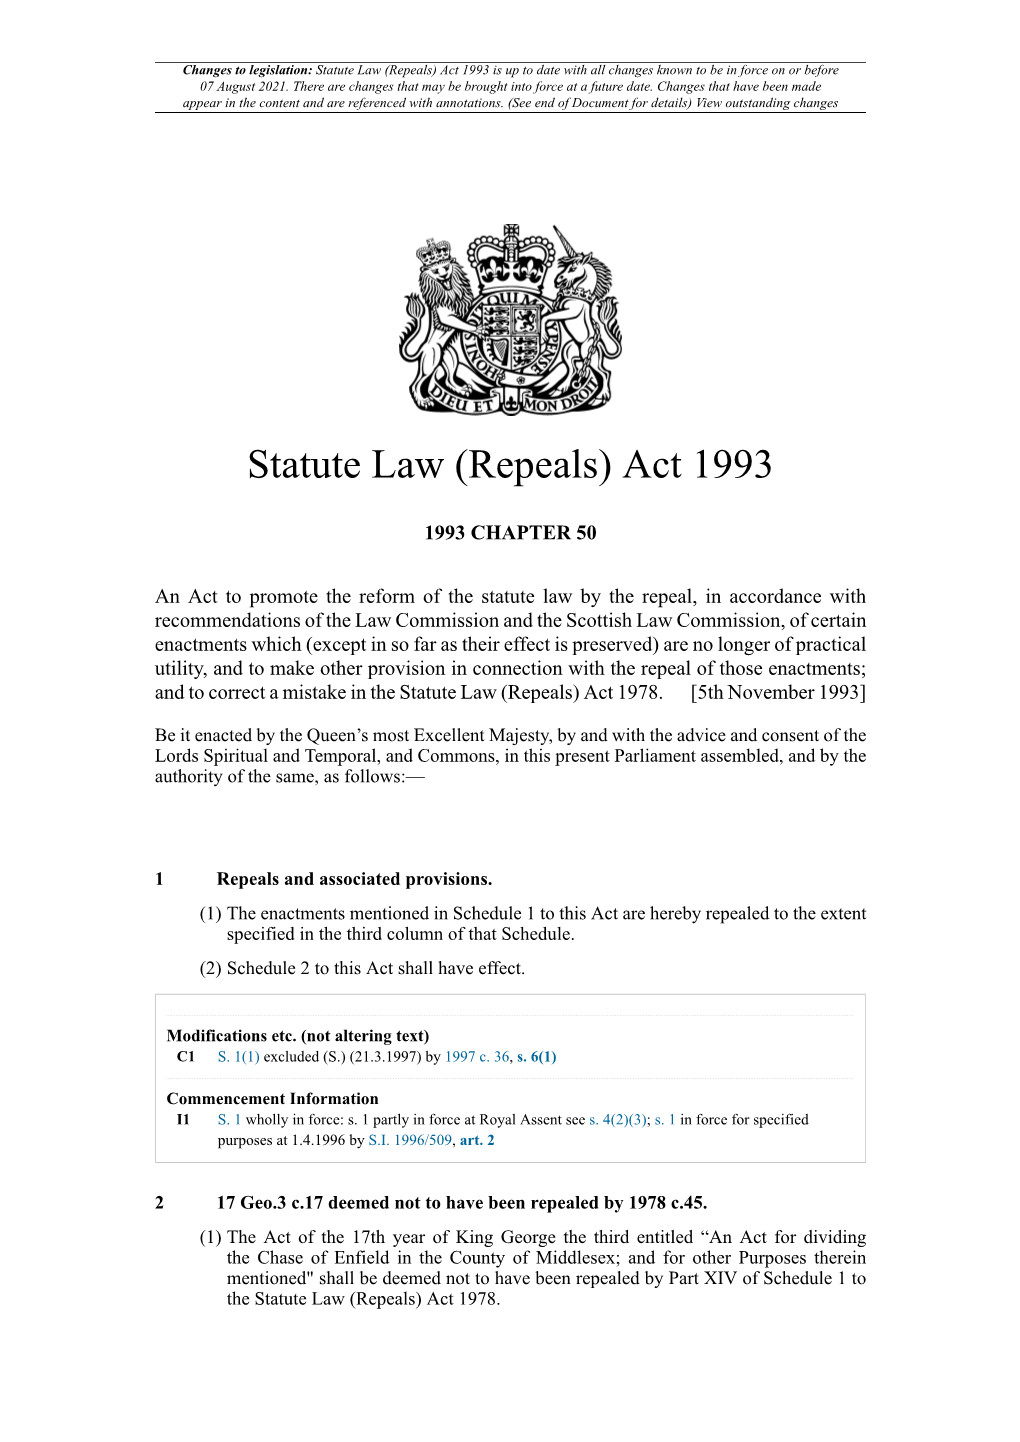 Statute Law (Repeals) Act 1993 Is up to Date with All Changes Known to Be in Force on Or Before 07 August 2021